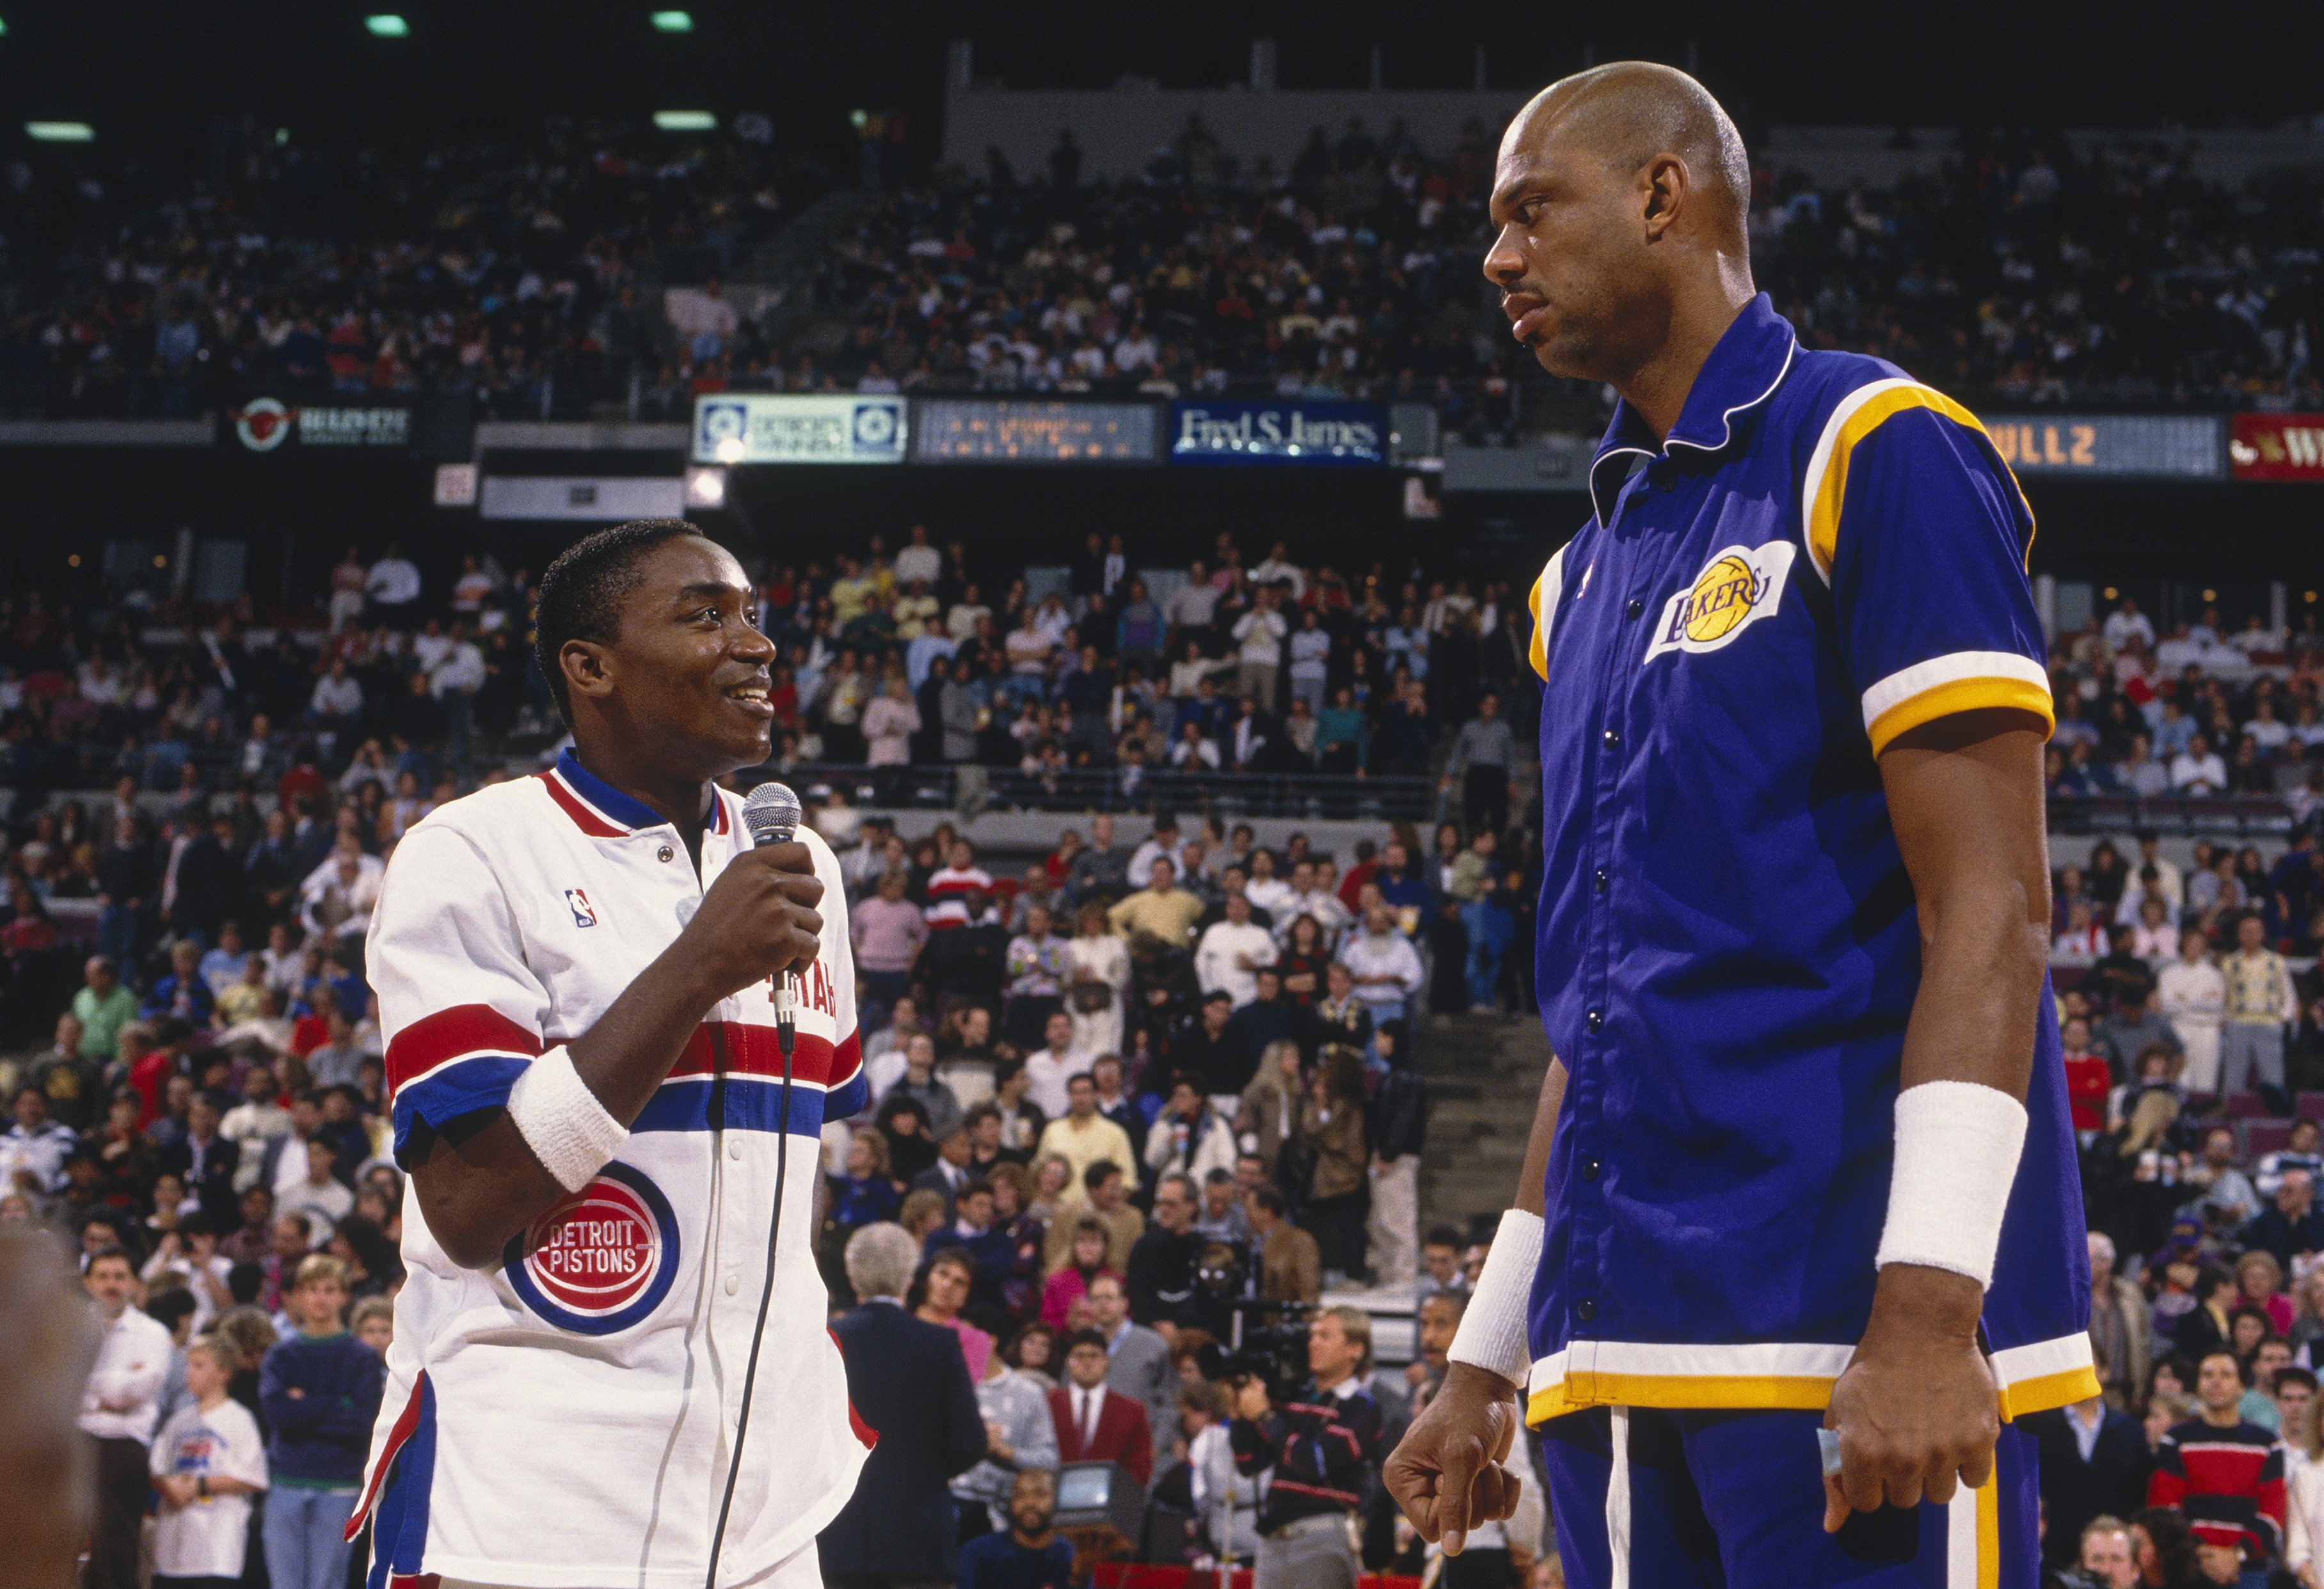 Detroit Pistons great Isiah Thomas speaks to Los Angeles Lakers icon Kareem Abdul-Jabbar during Cap's retirement ceremony in 1989